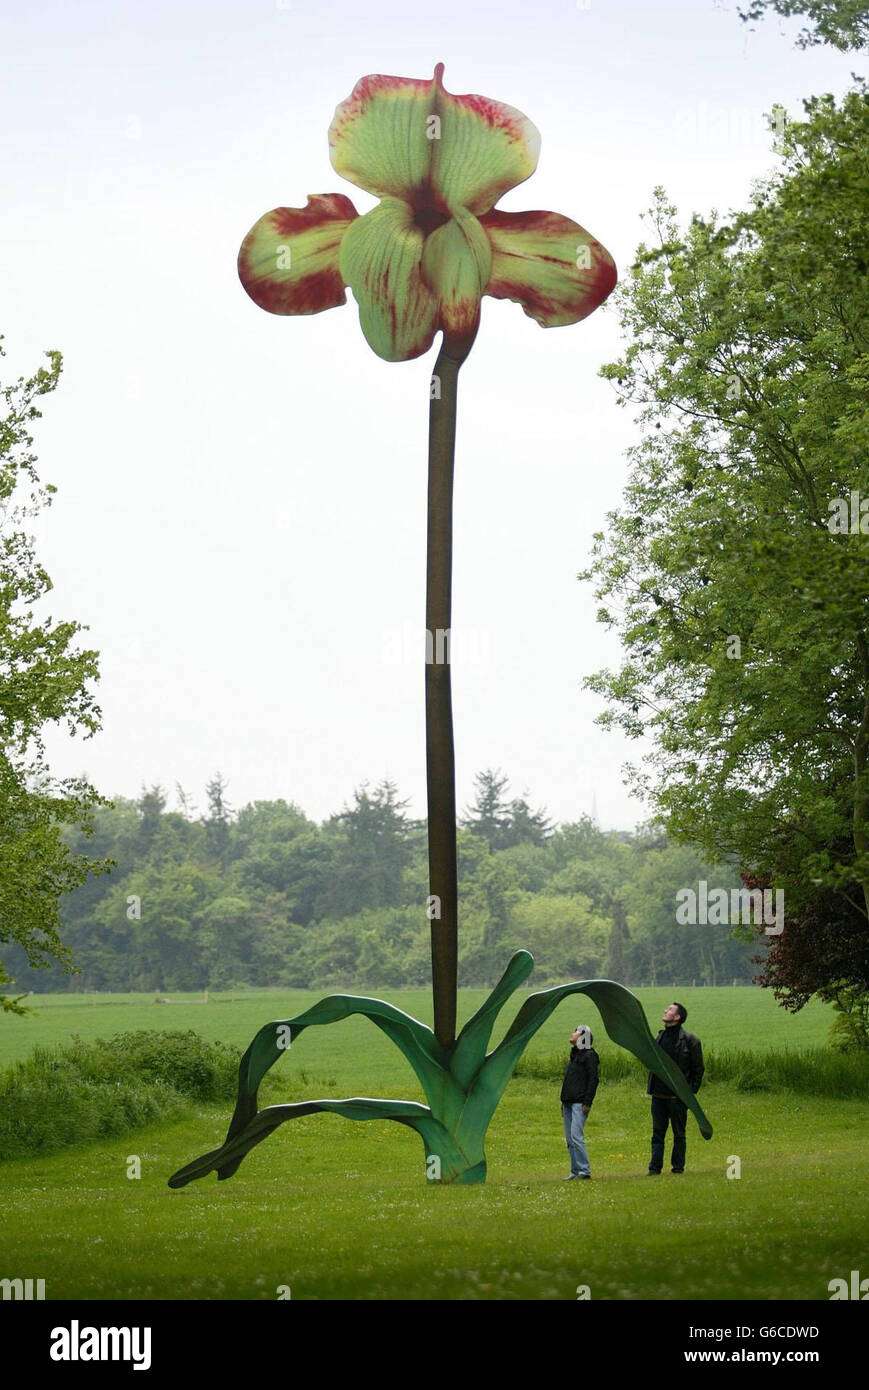 Like Gulliver in Lilliput, visitors to Goodwood Park can stand and admire Marc Quinn's lastest artwork The Overwhelming World of Desire (Paphiopedilum Winston Churchill Hybrid). * The 12 metre tall steel orchid will be officially unveiled on Wednesday. Stock Photo